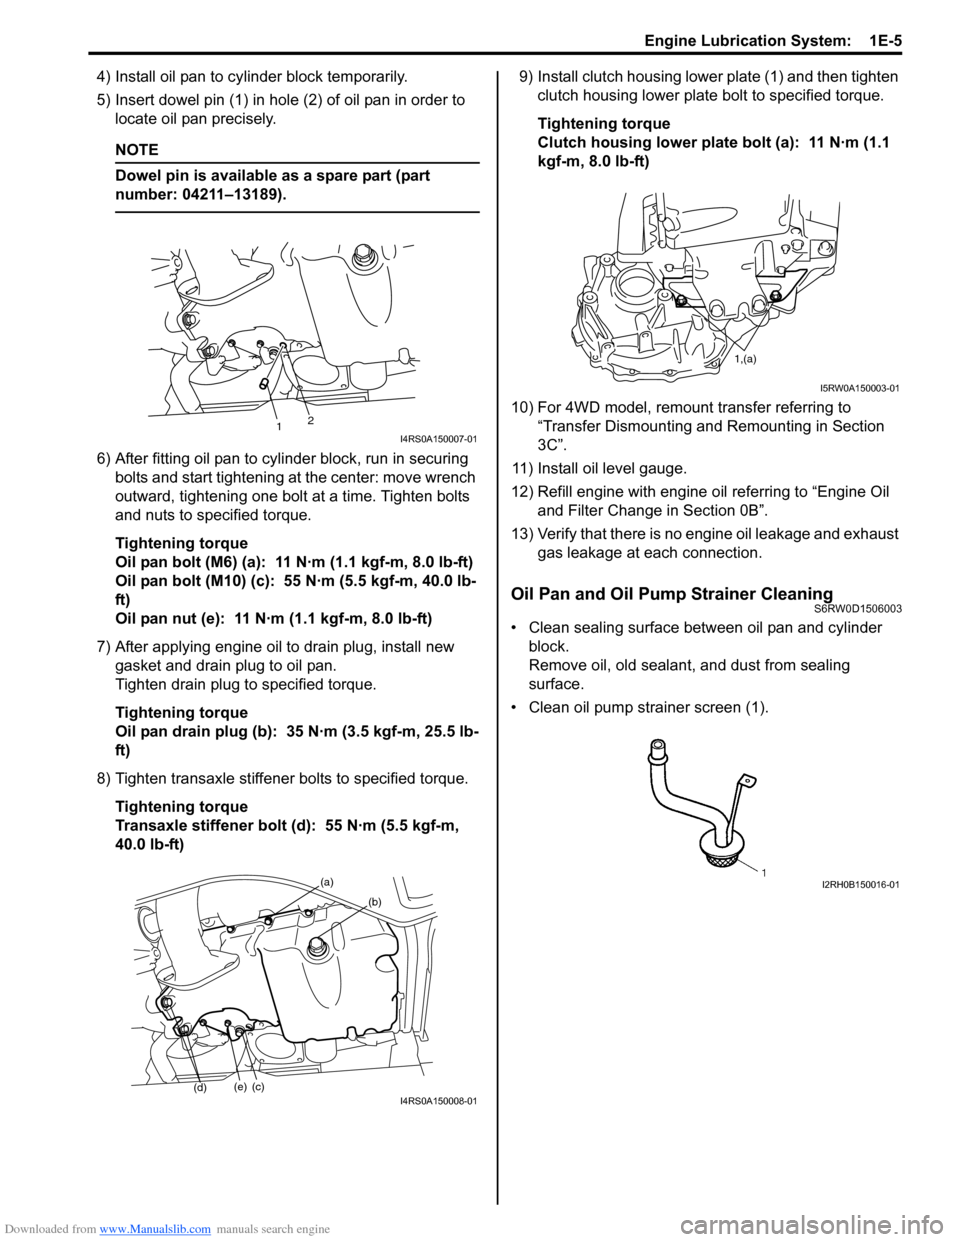 SUZUKI SX4 2006 1.G Service Workshop Manual Downloaded from www.Manualslib.com manuals search engine Engine Lubrication System:  1E-5
4) Install oil pan to cylinder block temporarily.
5) Insert dowel pin (1) in hole (2) of oil pan in order to 
